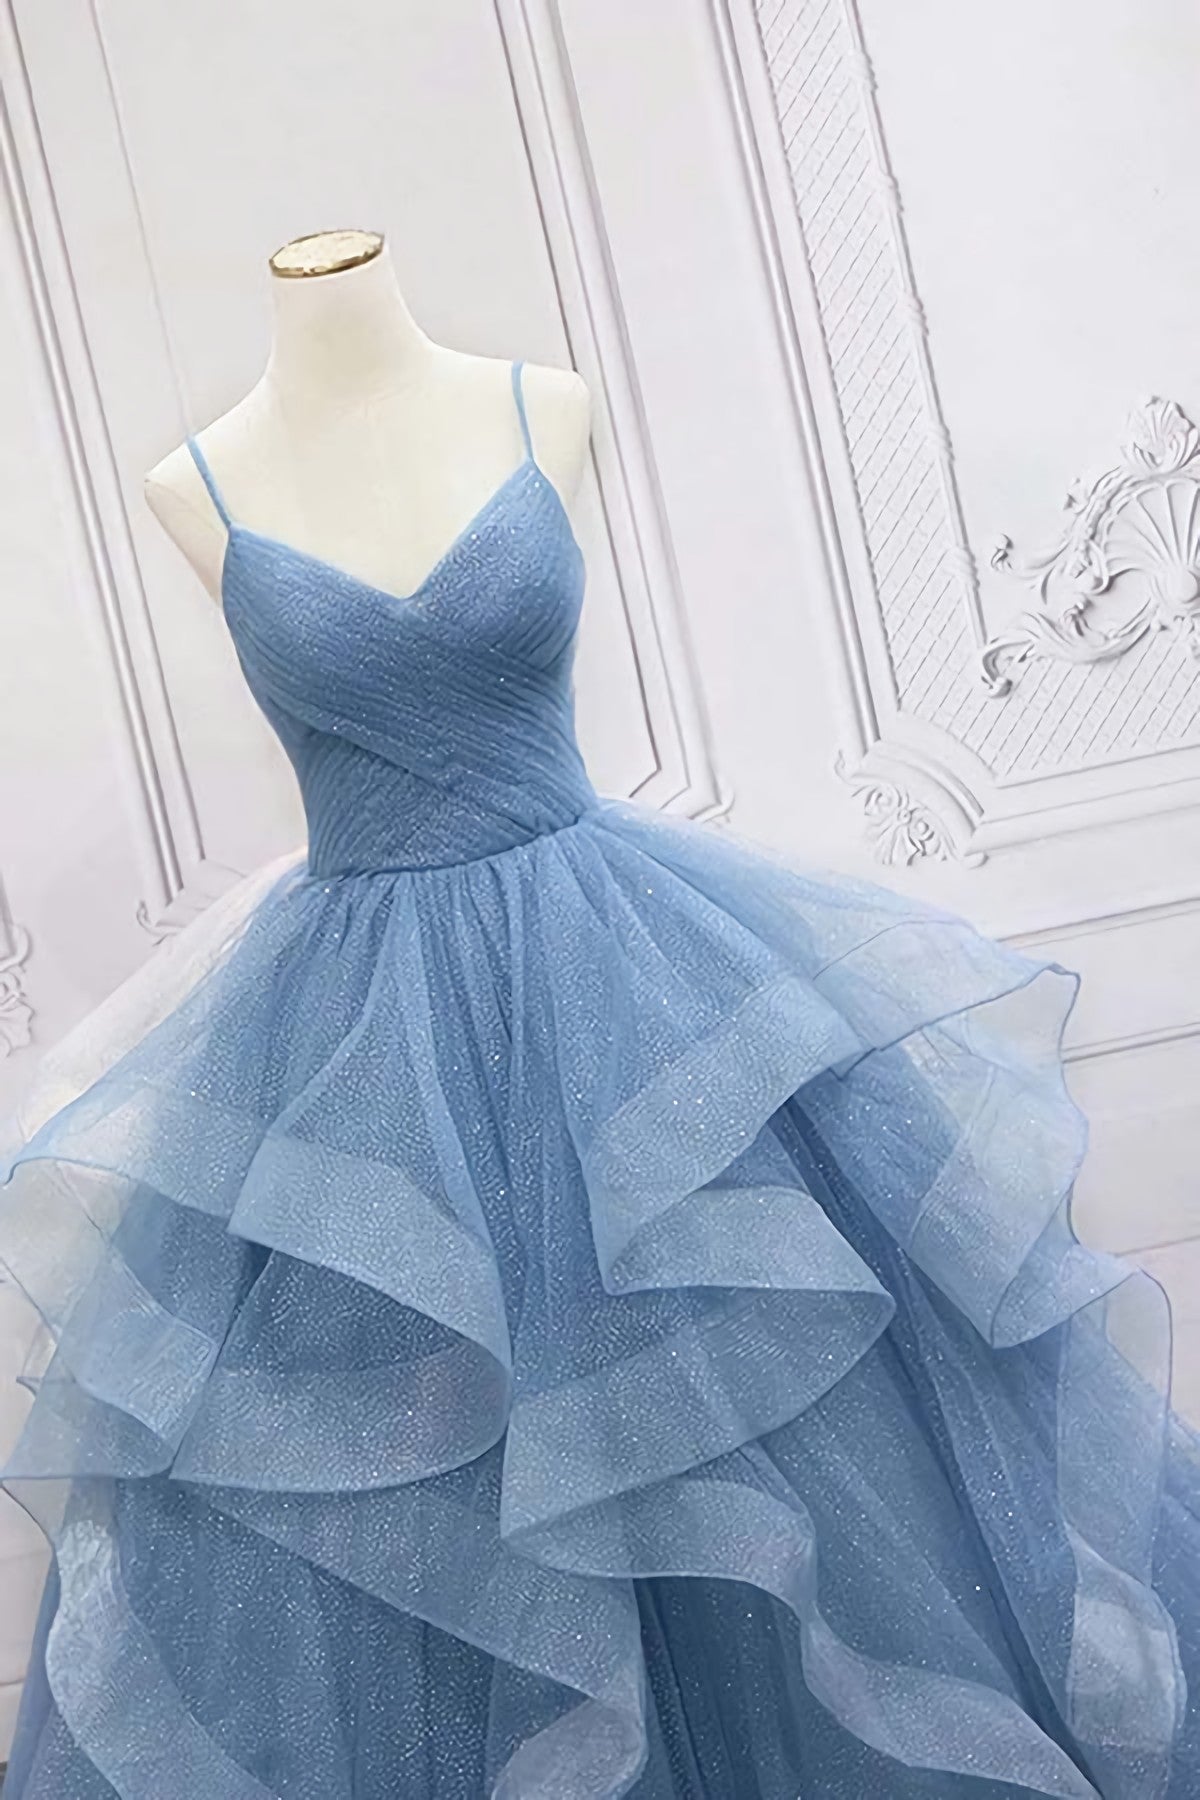 Prom Dresses Long With Sleeves, Shiny Blue Tulle A-Line Spaghetti Straps Long Prom Dresses